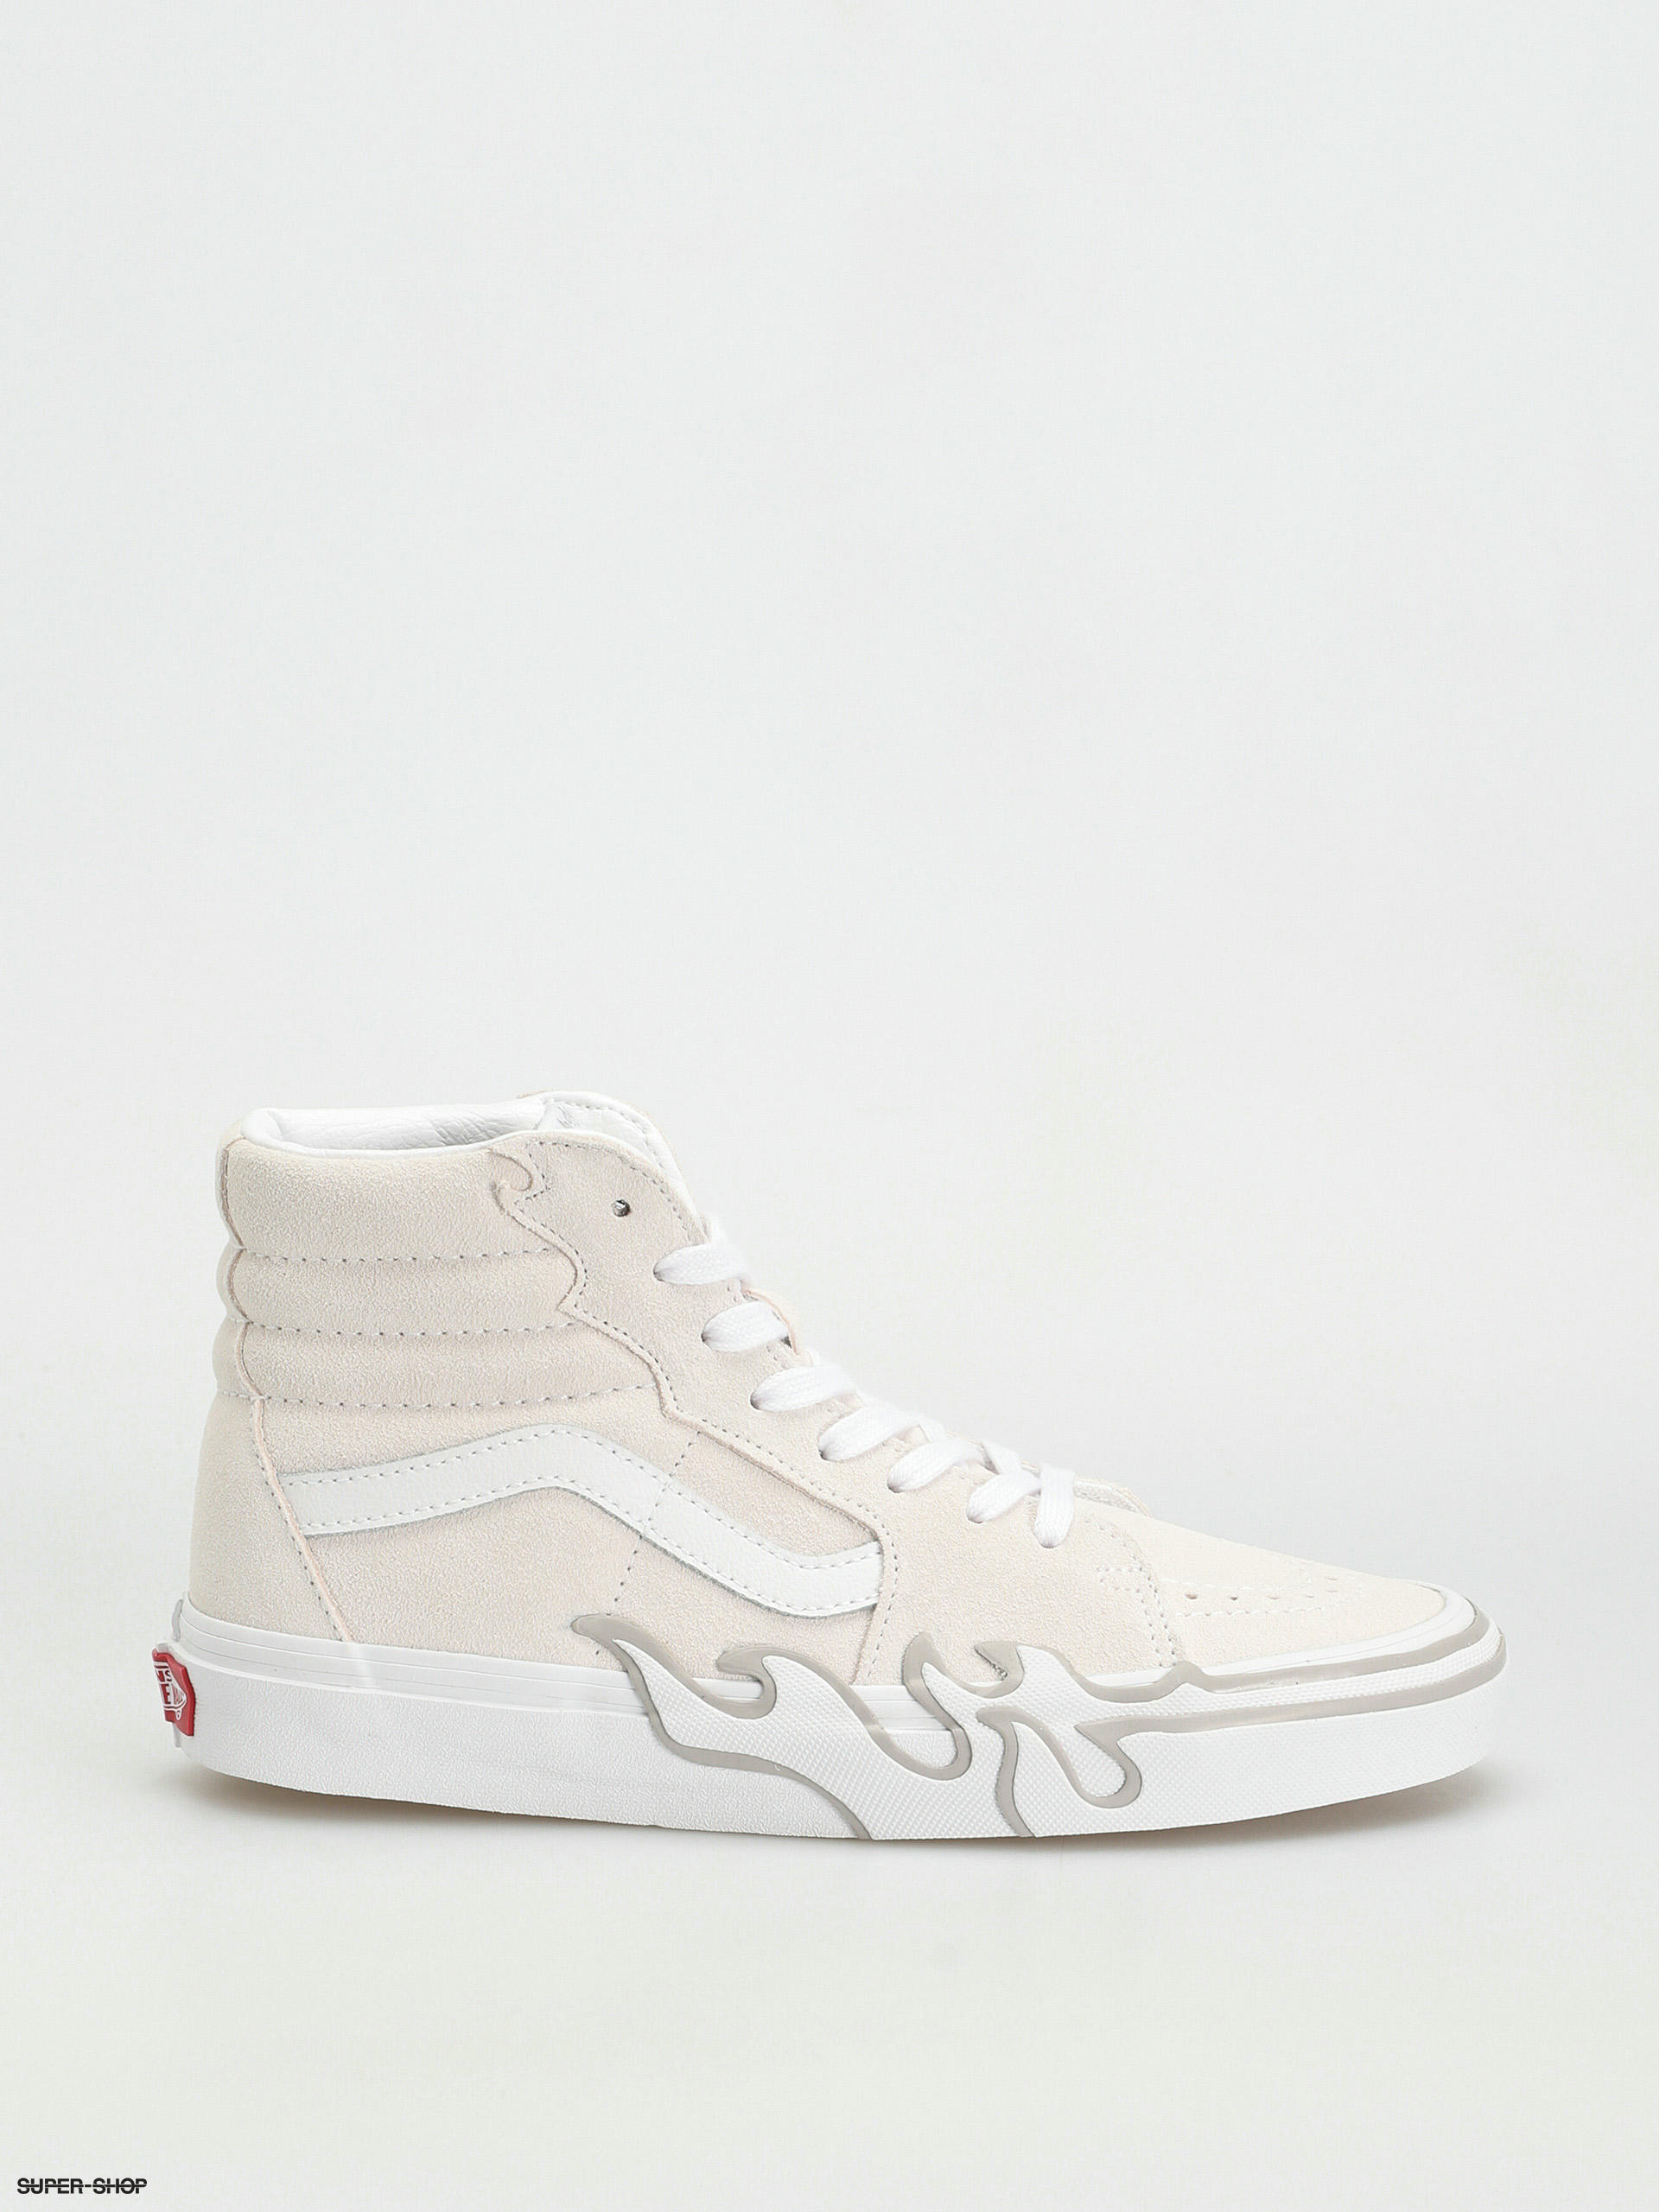 Vans Sk8 Hi Flame Shoes (suede white/white)